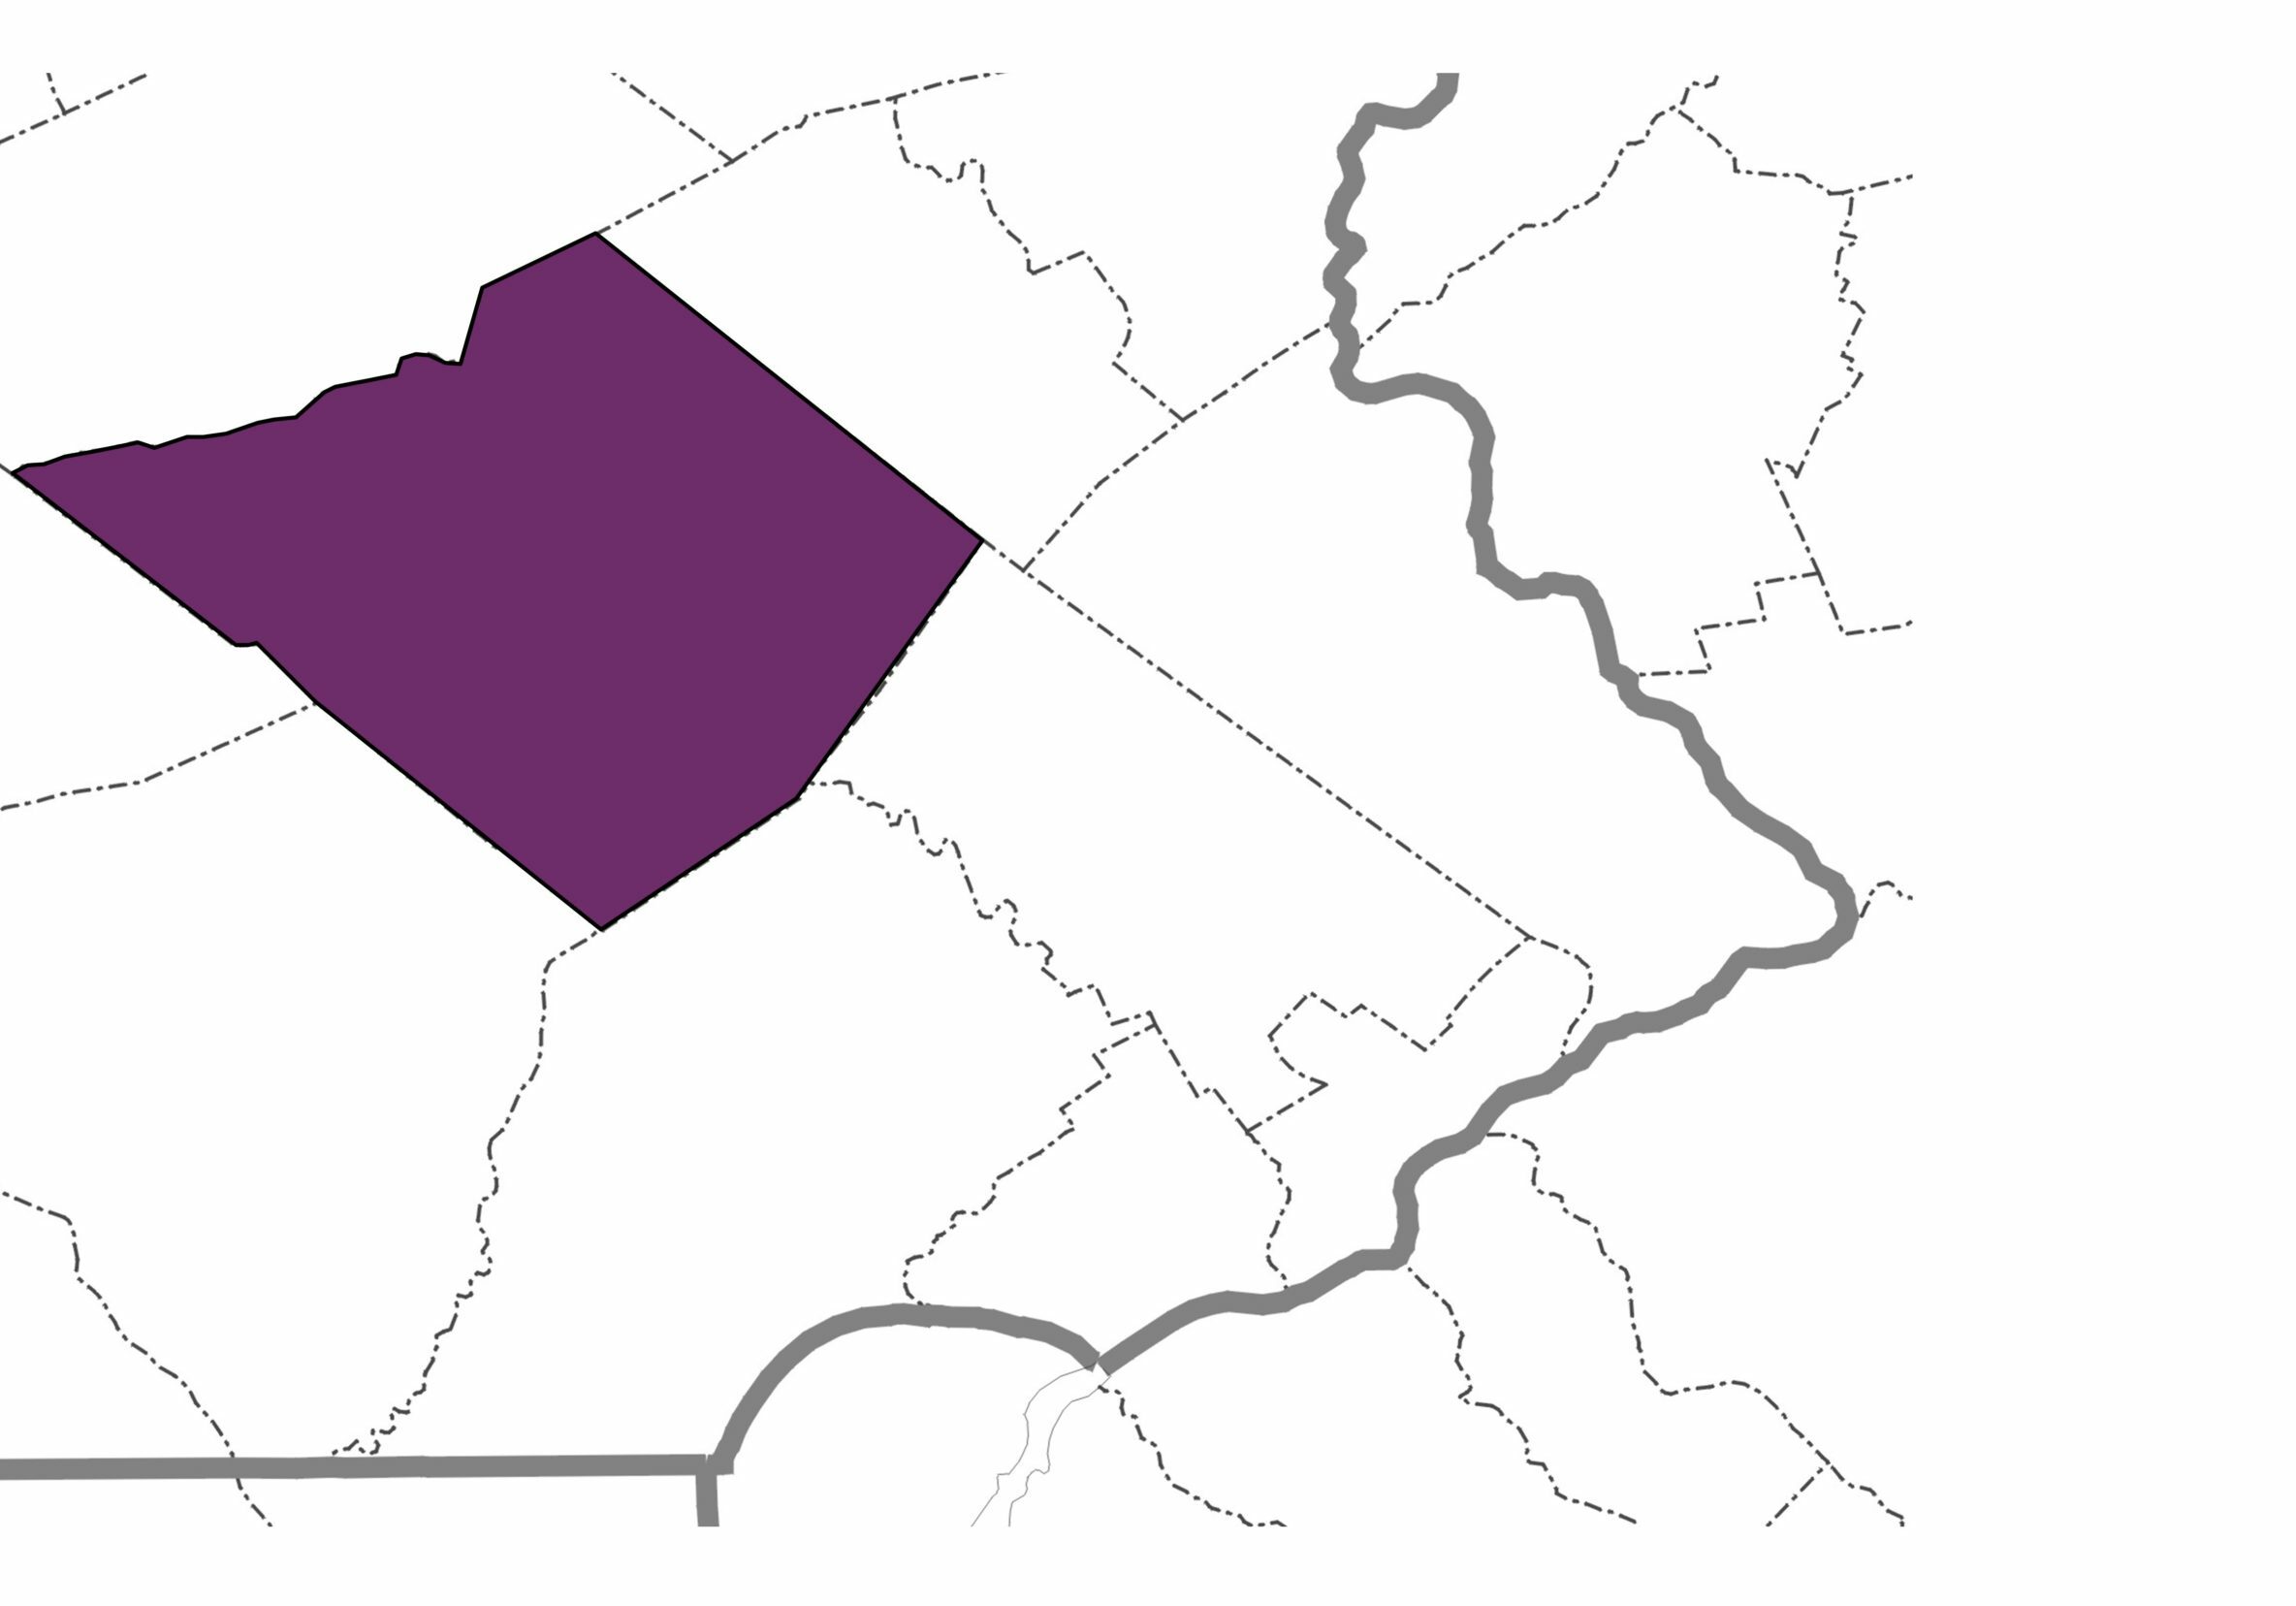 Berks County Highlighted on Local Map That Shows County Borders